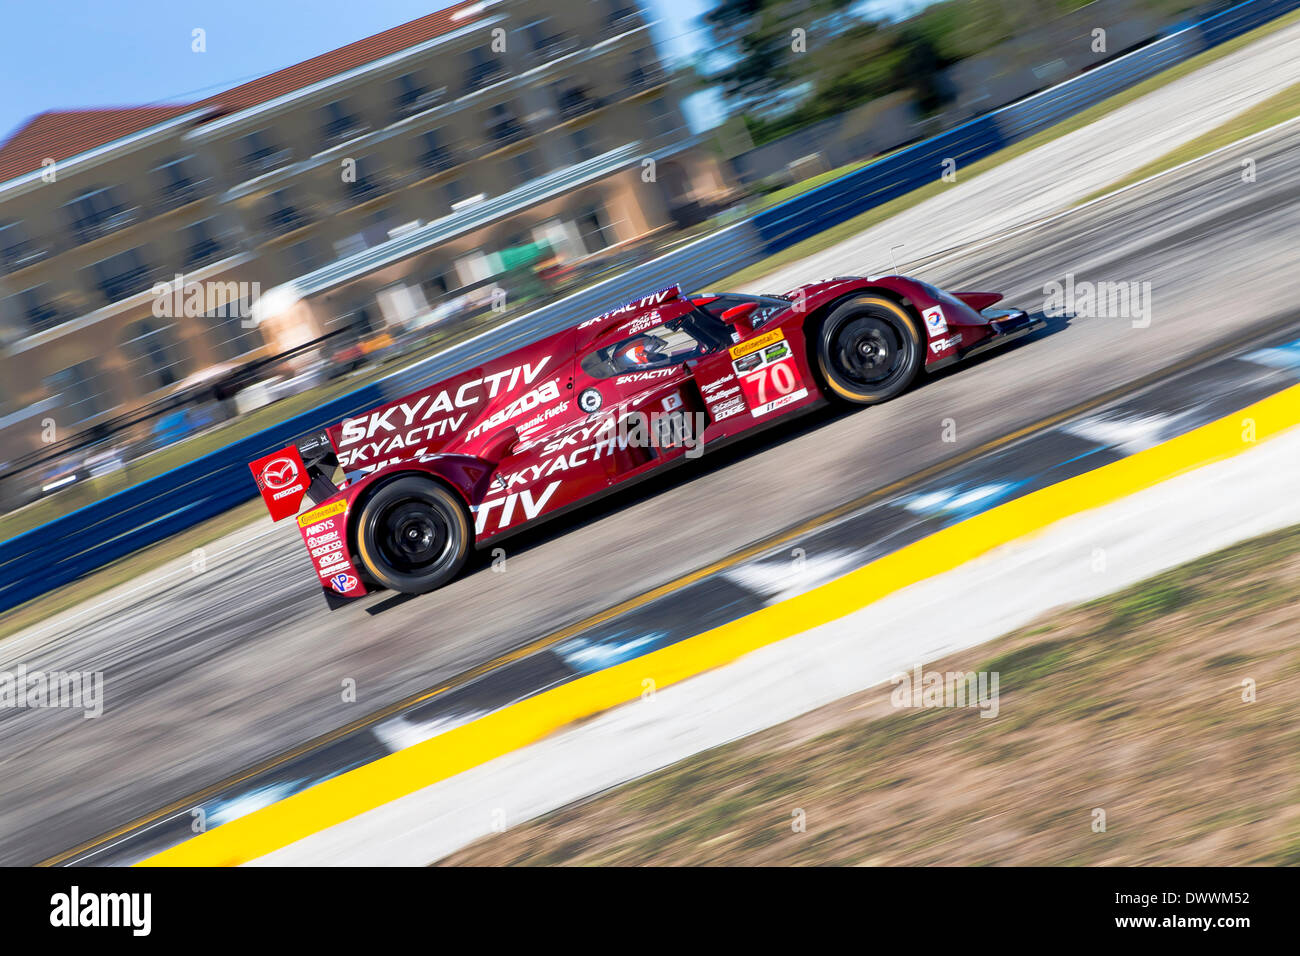 Sebring, FL, USA. 13th Mar, 2014. Sebring, FL - Mar 13, 2014: The SpeedSource Mazda takes to the track on Continental tires for a practice session for the 12 Hours of Sebring at Sebring International Raceway in Sebring, FL. Credit:  csm/Alamy Live News Stock Photo